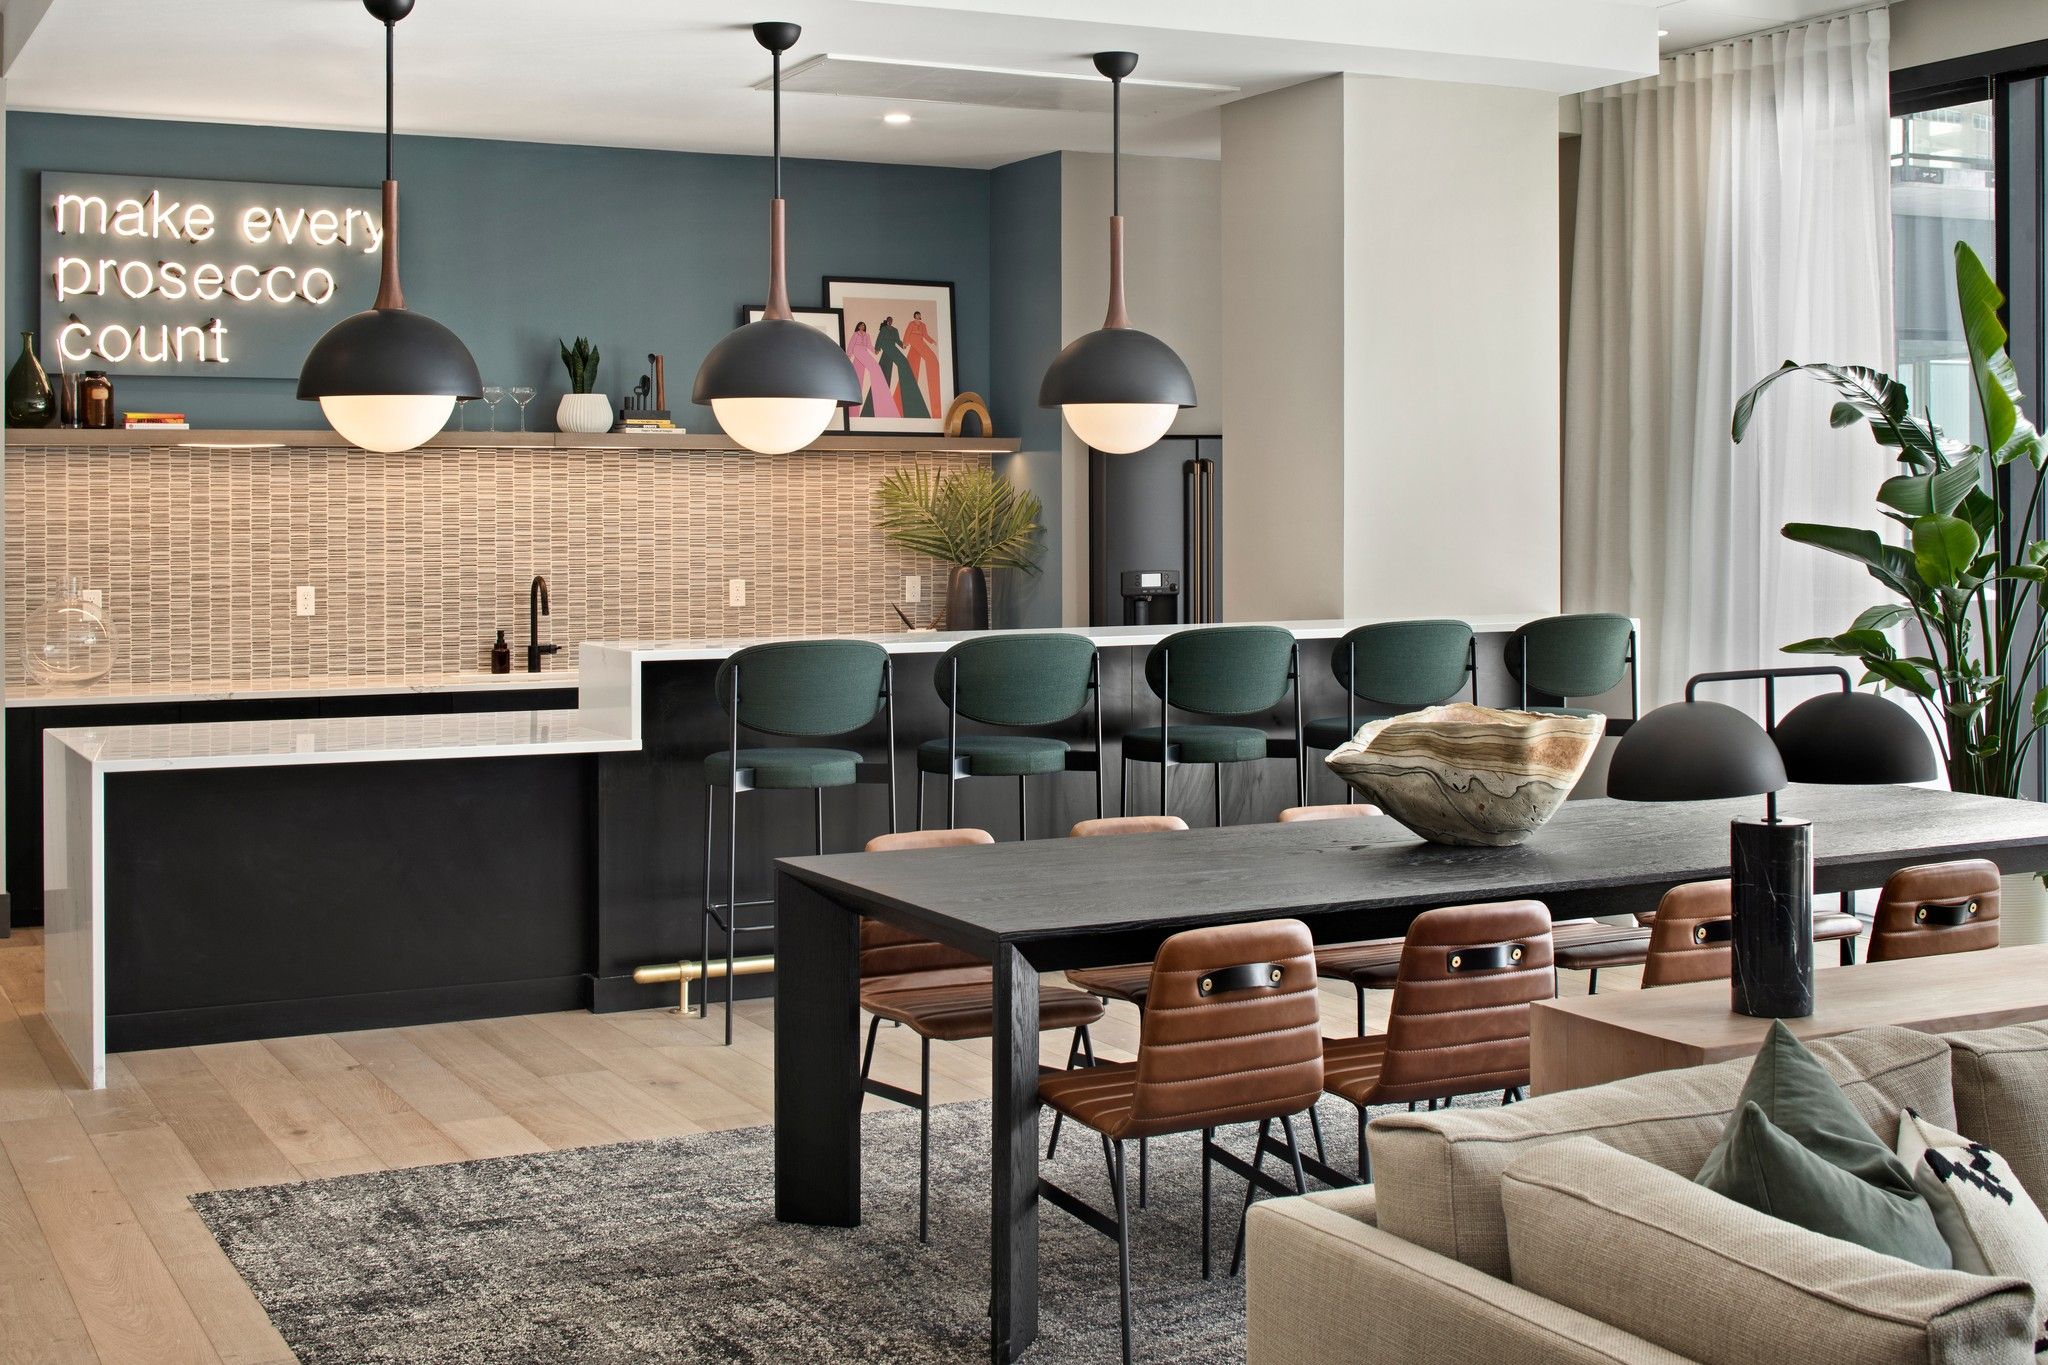 Fika Lounge apartment amenity with seating and kitchen area